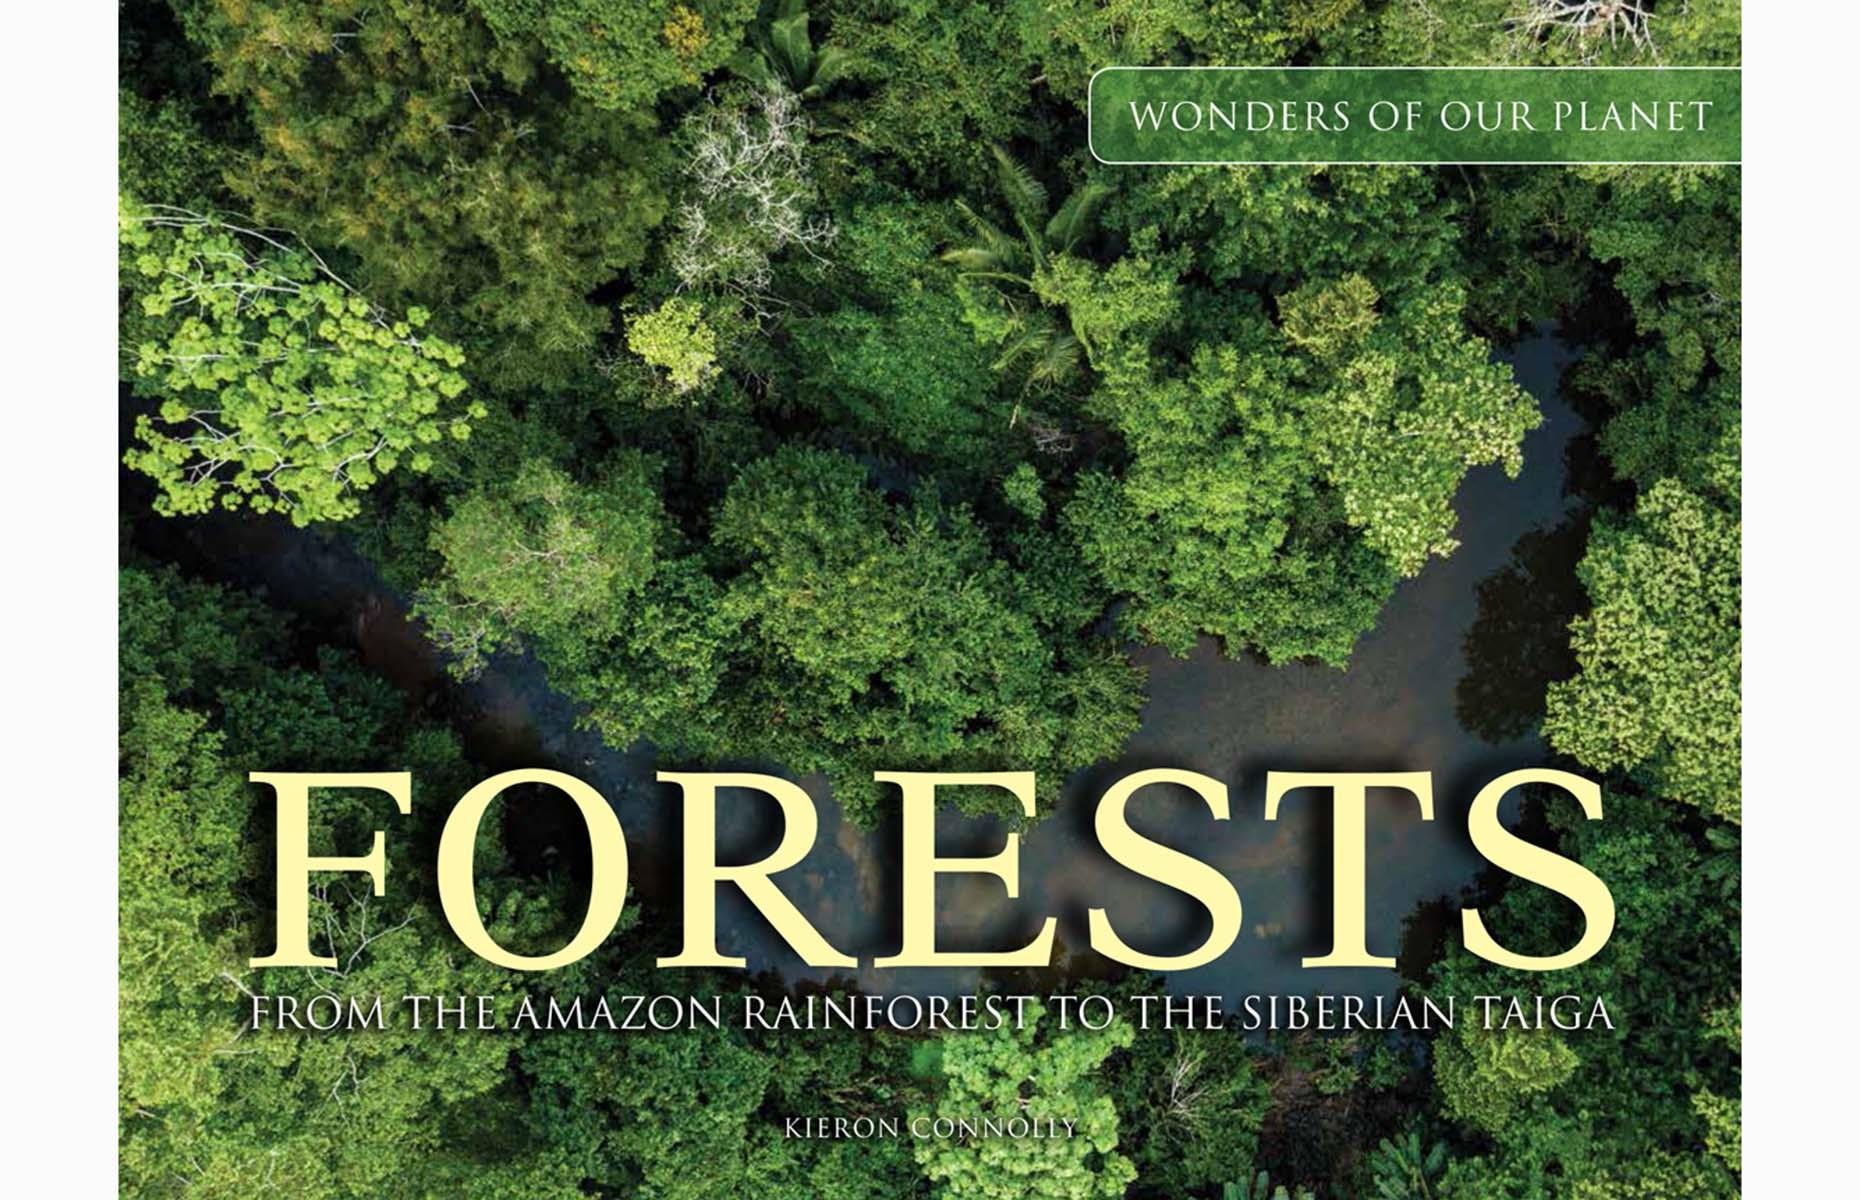 <p>All images taken from the book<em> Forests</em> by Kieron Connolly (ISBN 9781838861674) published by <a href="http://www.amberbooks.co.uk">Amber Books Ltd</a> and available from bookshops and online booksellers (RRP $29.99).</p>  <p><a href="https://www.loveexploring.com/galleries/69707/beautiful-forests-of-the-world?page=1"><strong>Discover more beautiful forests of the world</strong></a></p>